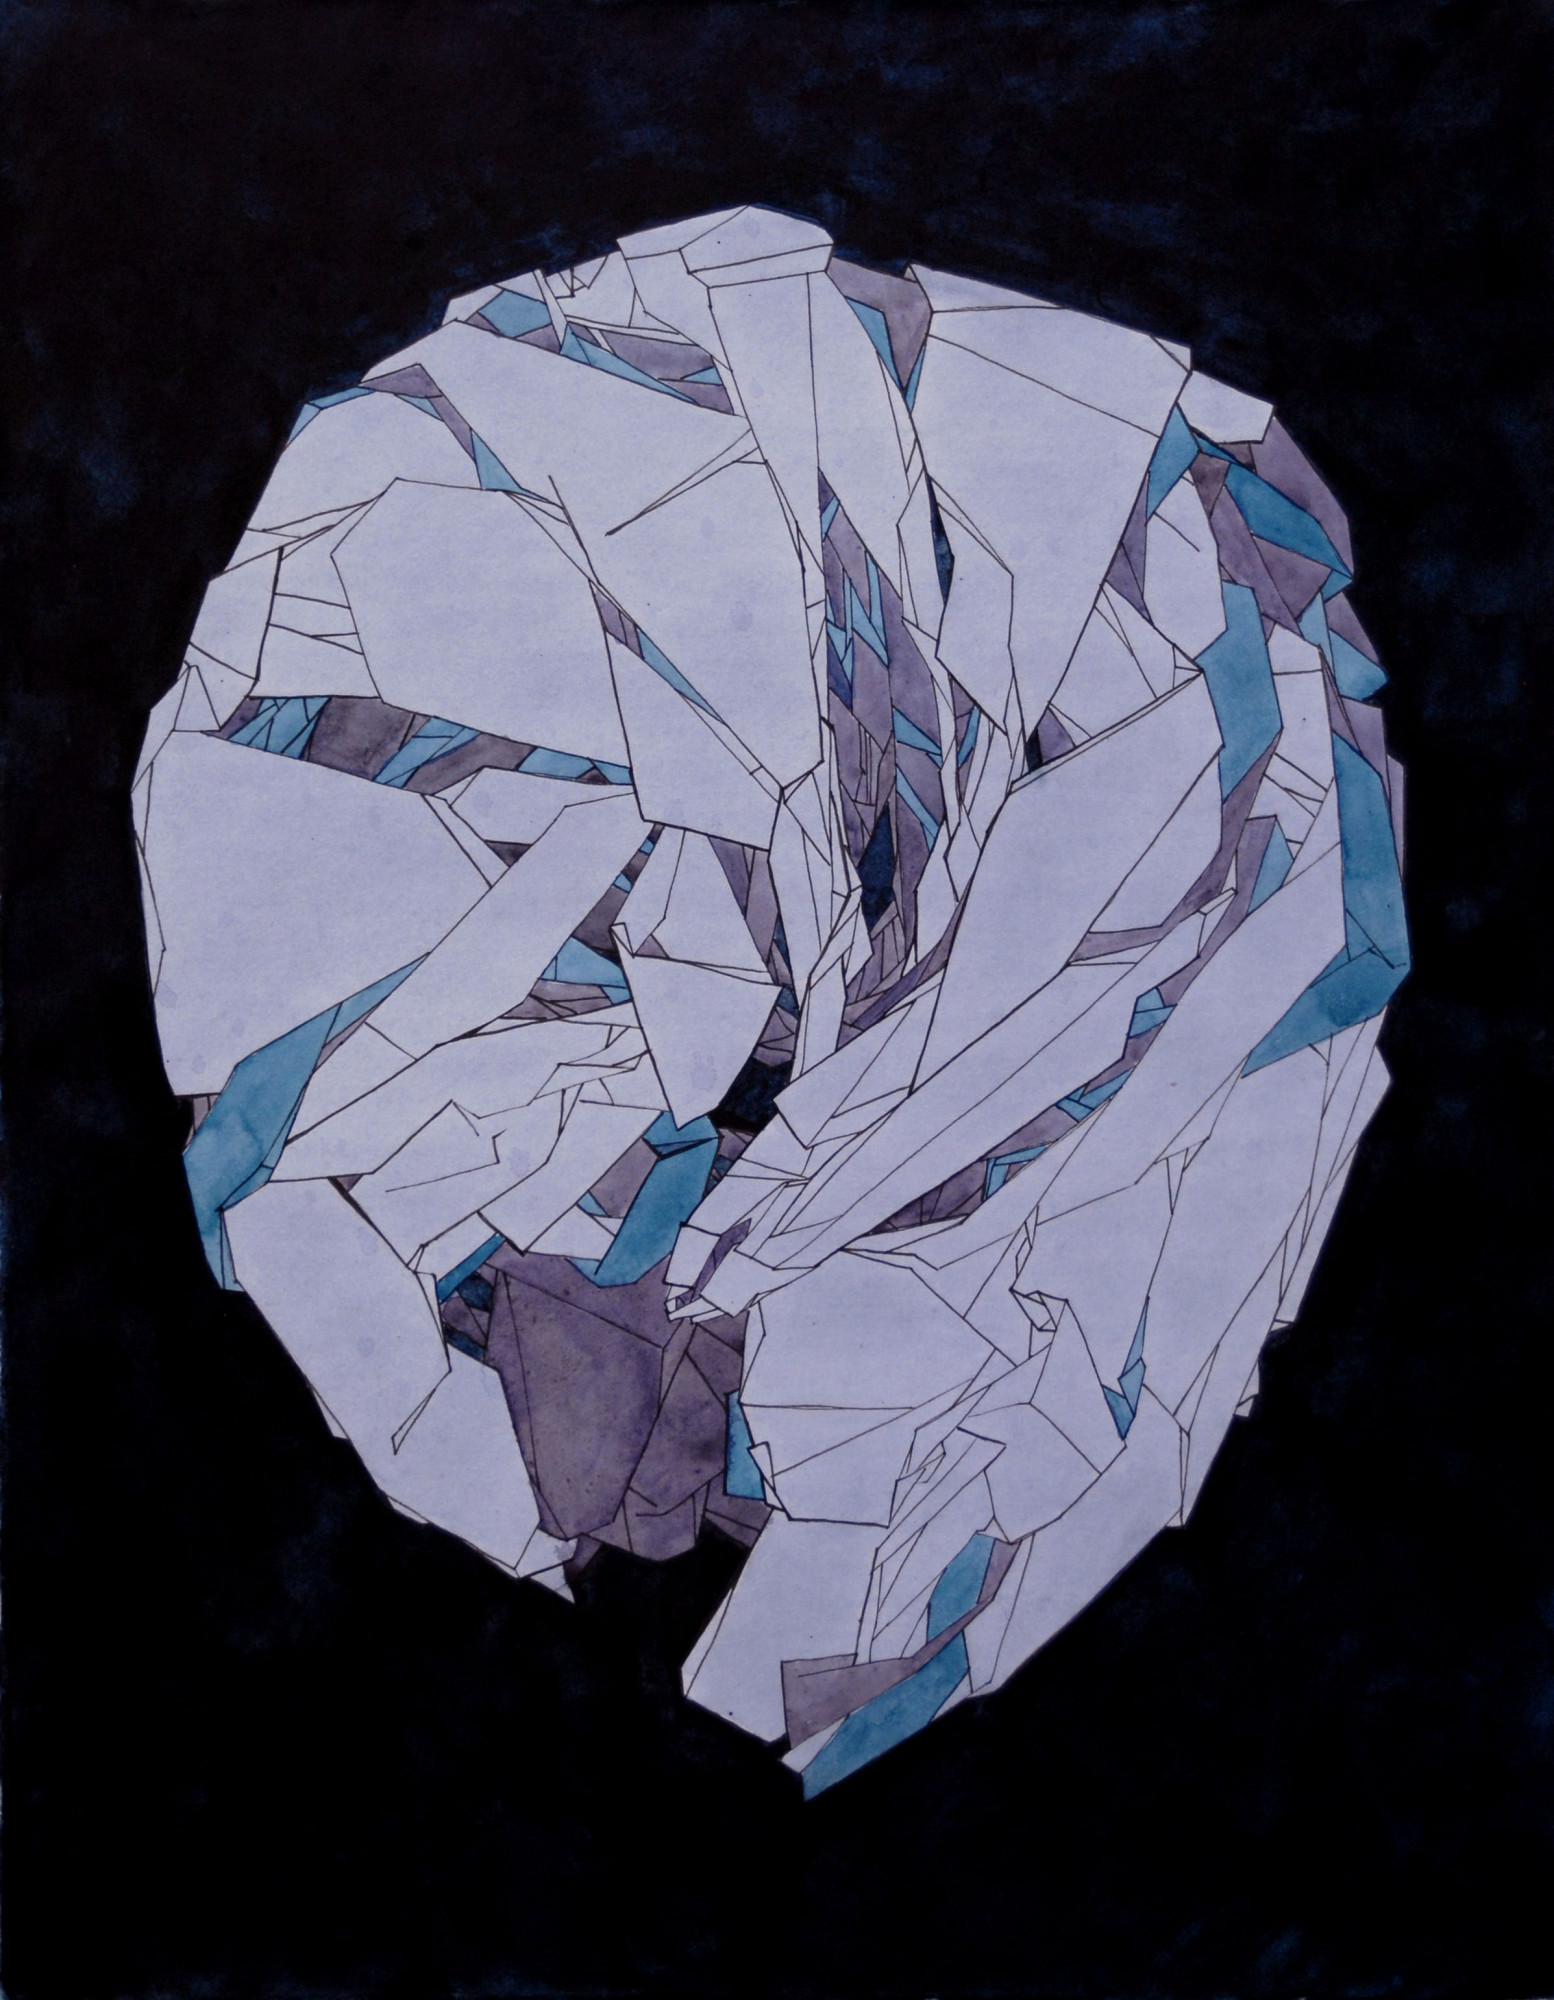 Kami no Yama (Paper Mountain), 2014. Crumpled paper serves as an image of compressing information without a possibility of restoring it